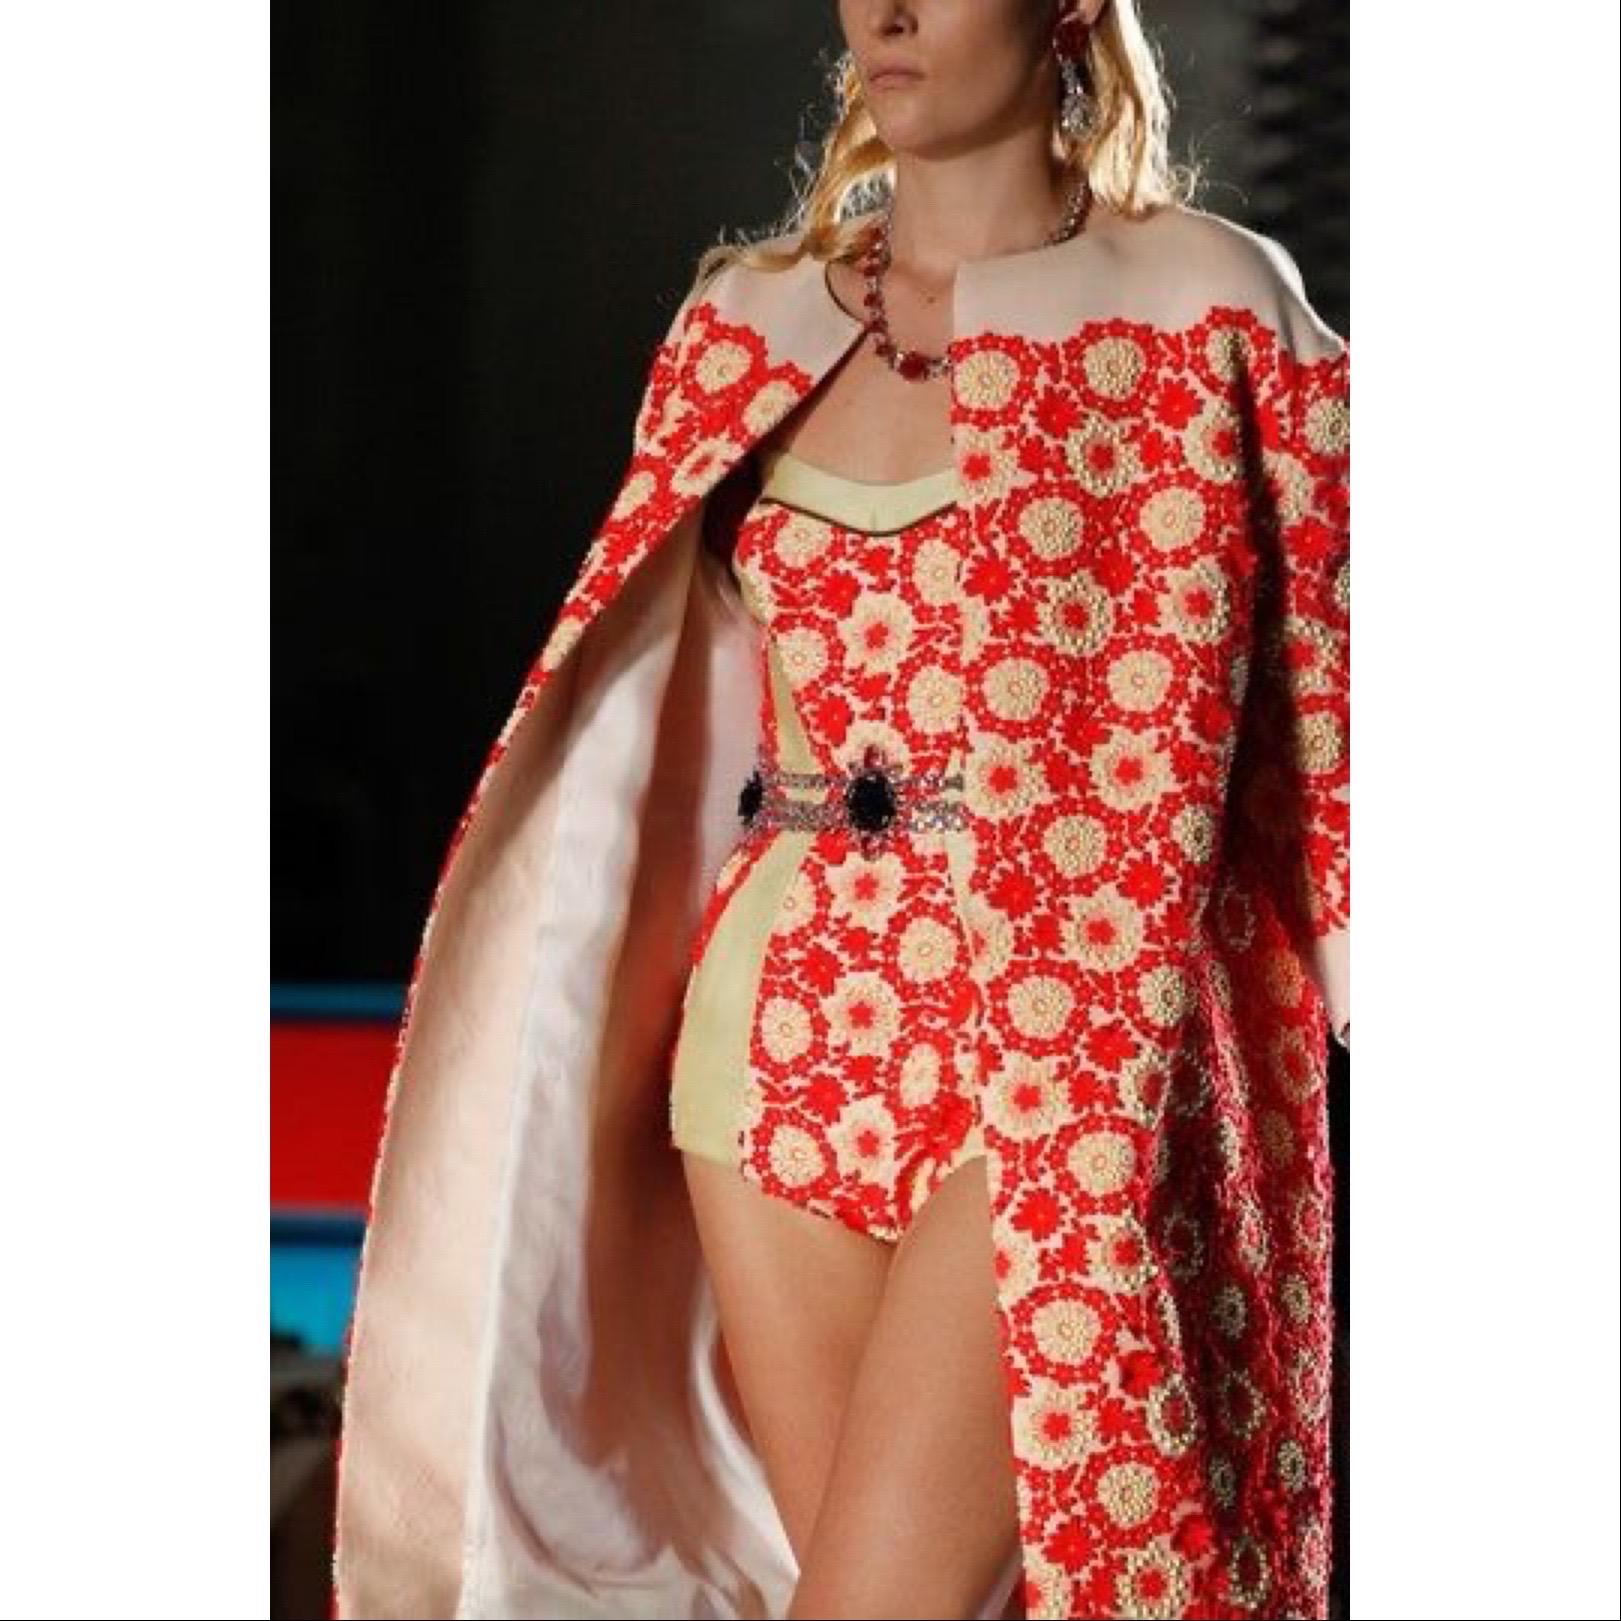 Prada Most Wanted Spring 2012 Floral Embroidered Pinup Bodysuit For Sale 10